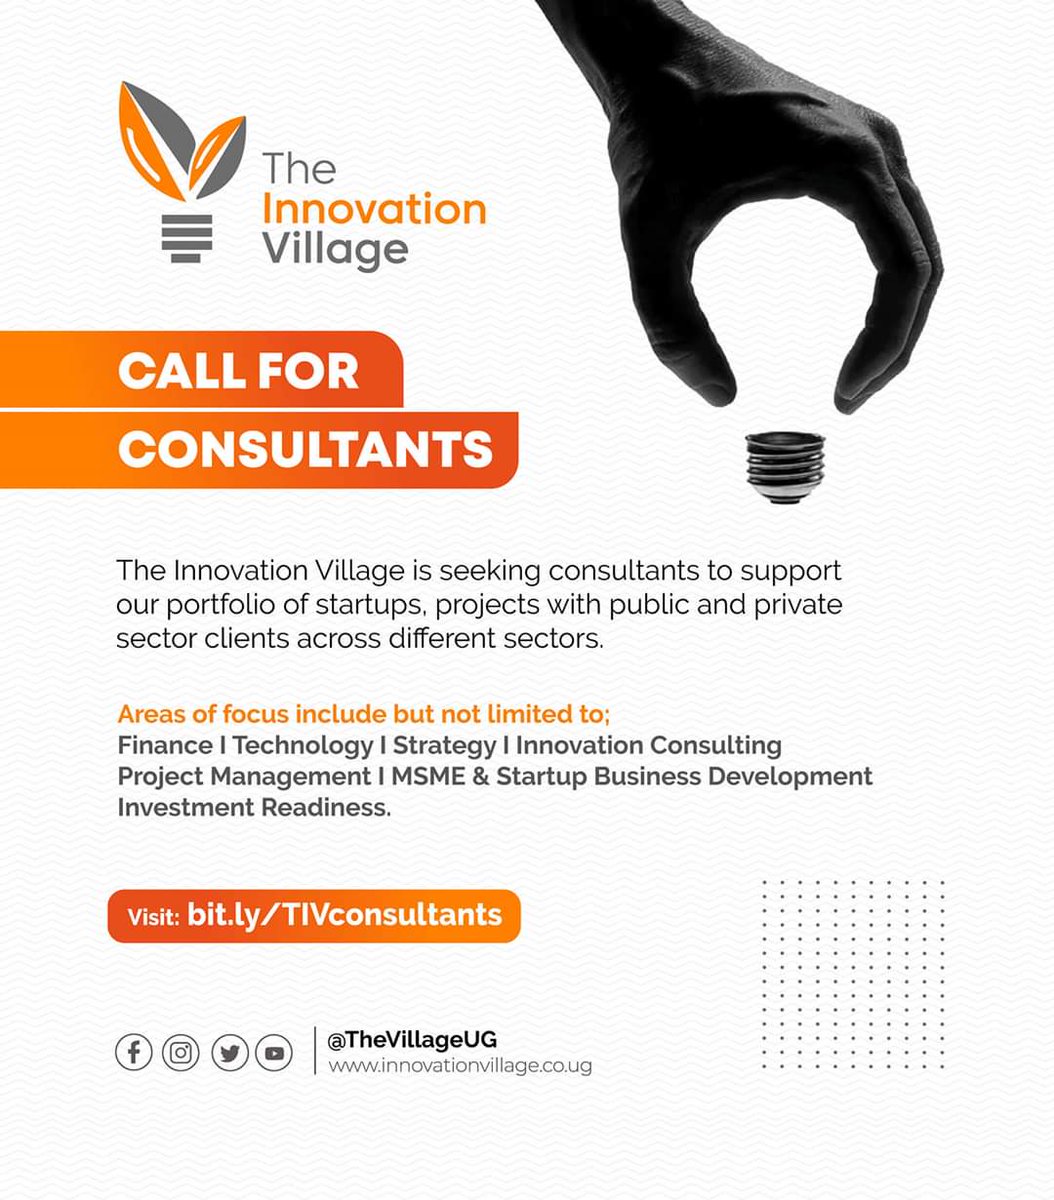 #CallForConsultants: The @TheVillageUG is looking for both Local and International Consultants who can integrate their technical expertise with strong interpersonal and management skills.

Visit bit.ly/TIVconsultants to submit your interest.